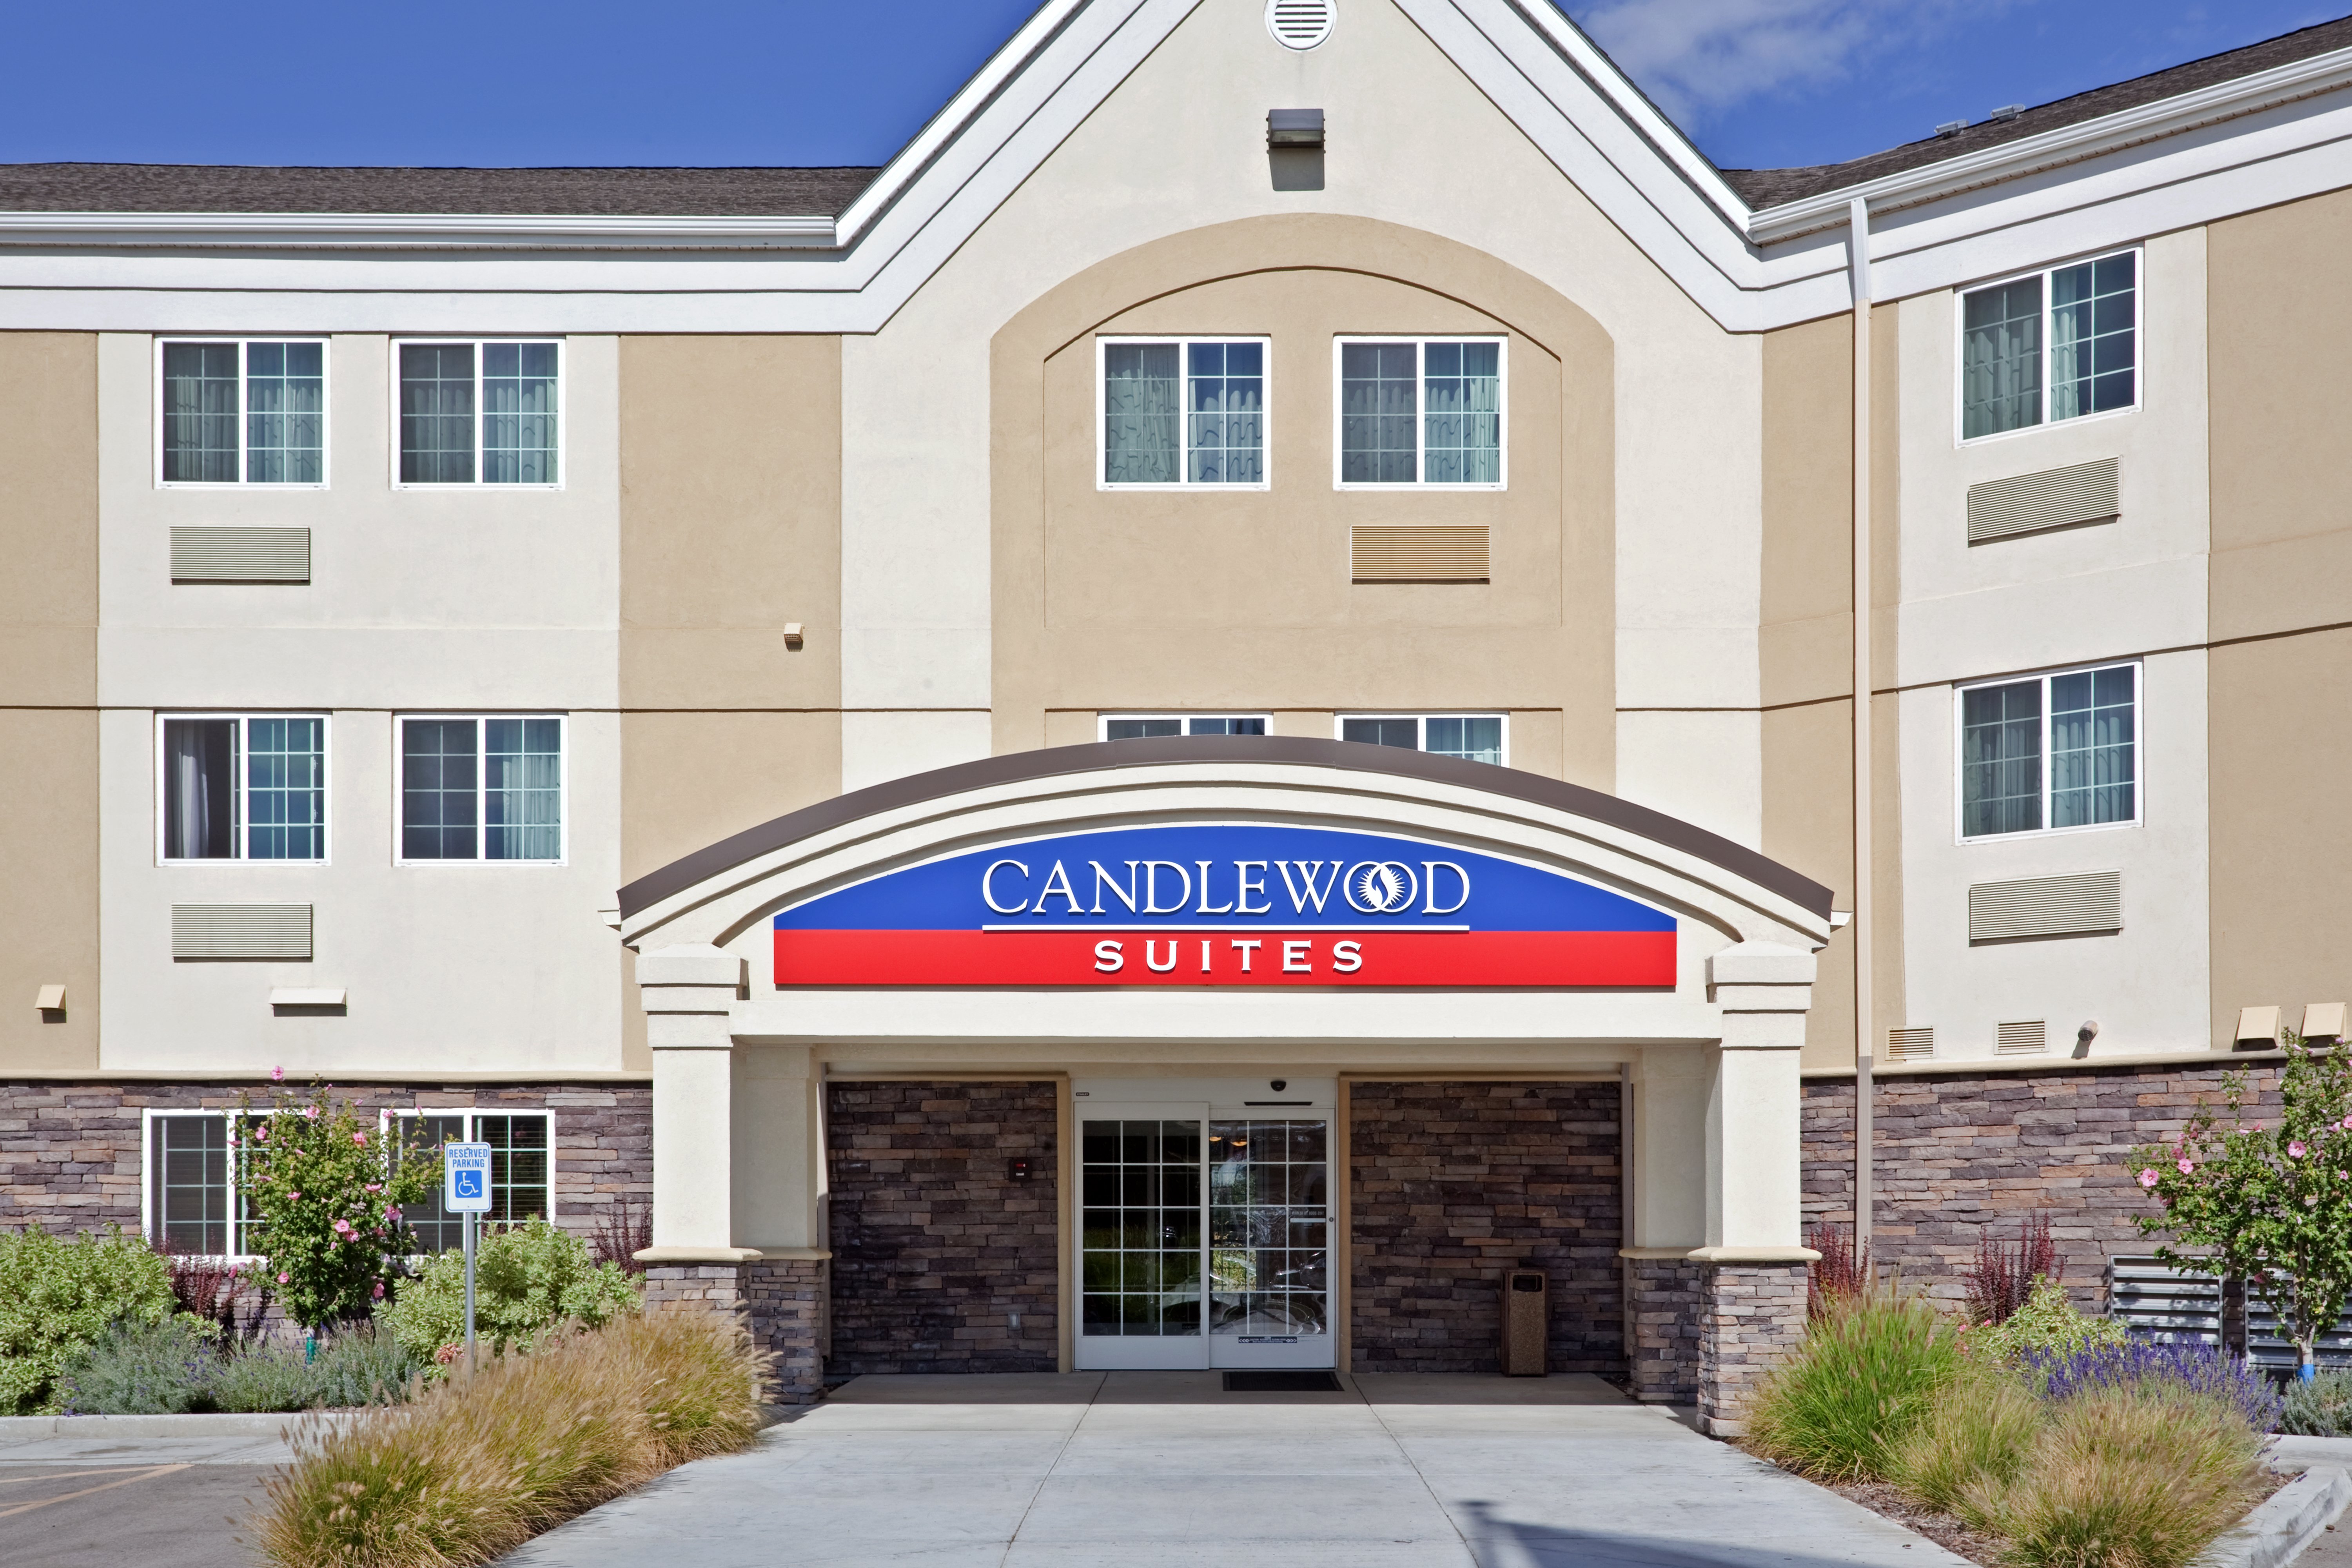 Candlewood Suites Boise near I-84 and the Boise Towne Square Mall